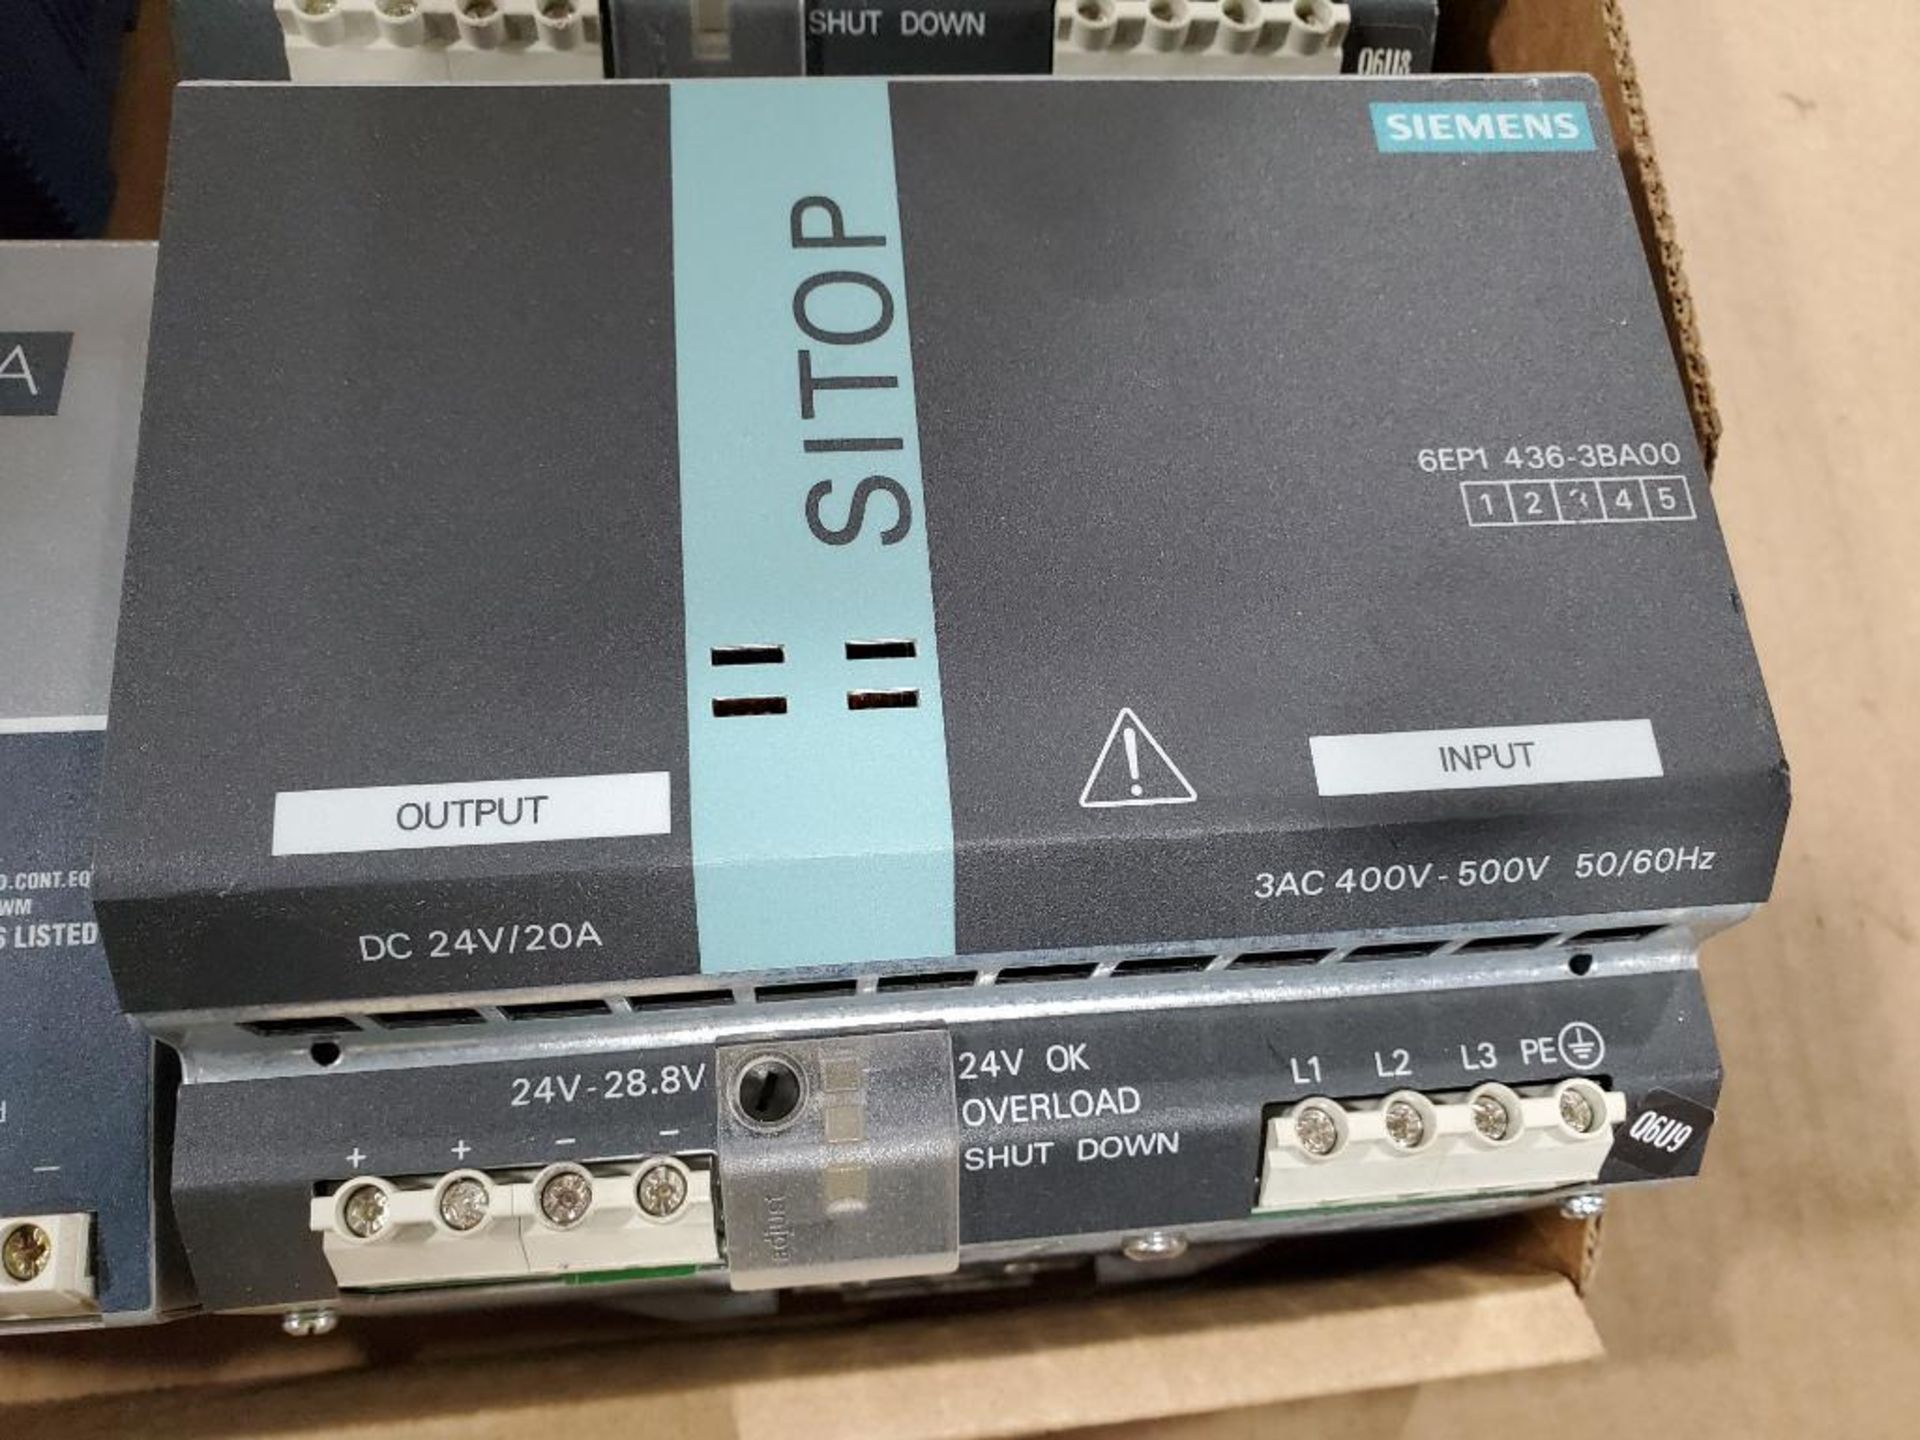 Qty 4 - Siemens Sitop, Sola, and Puls power supplies. - Image 3 of 9